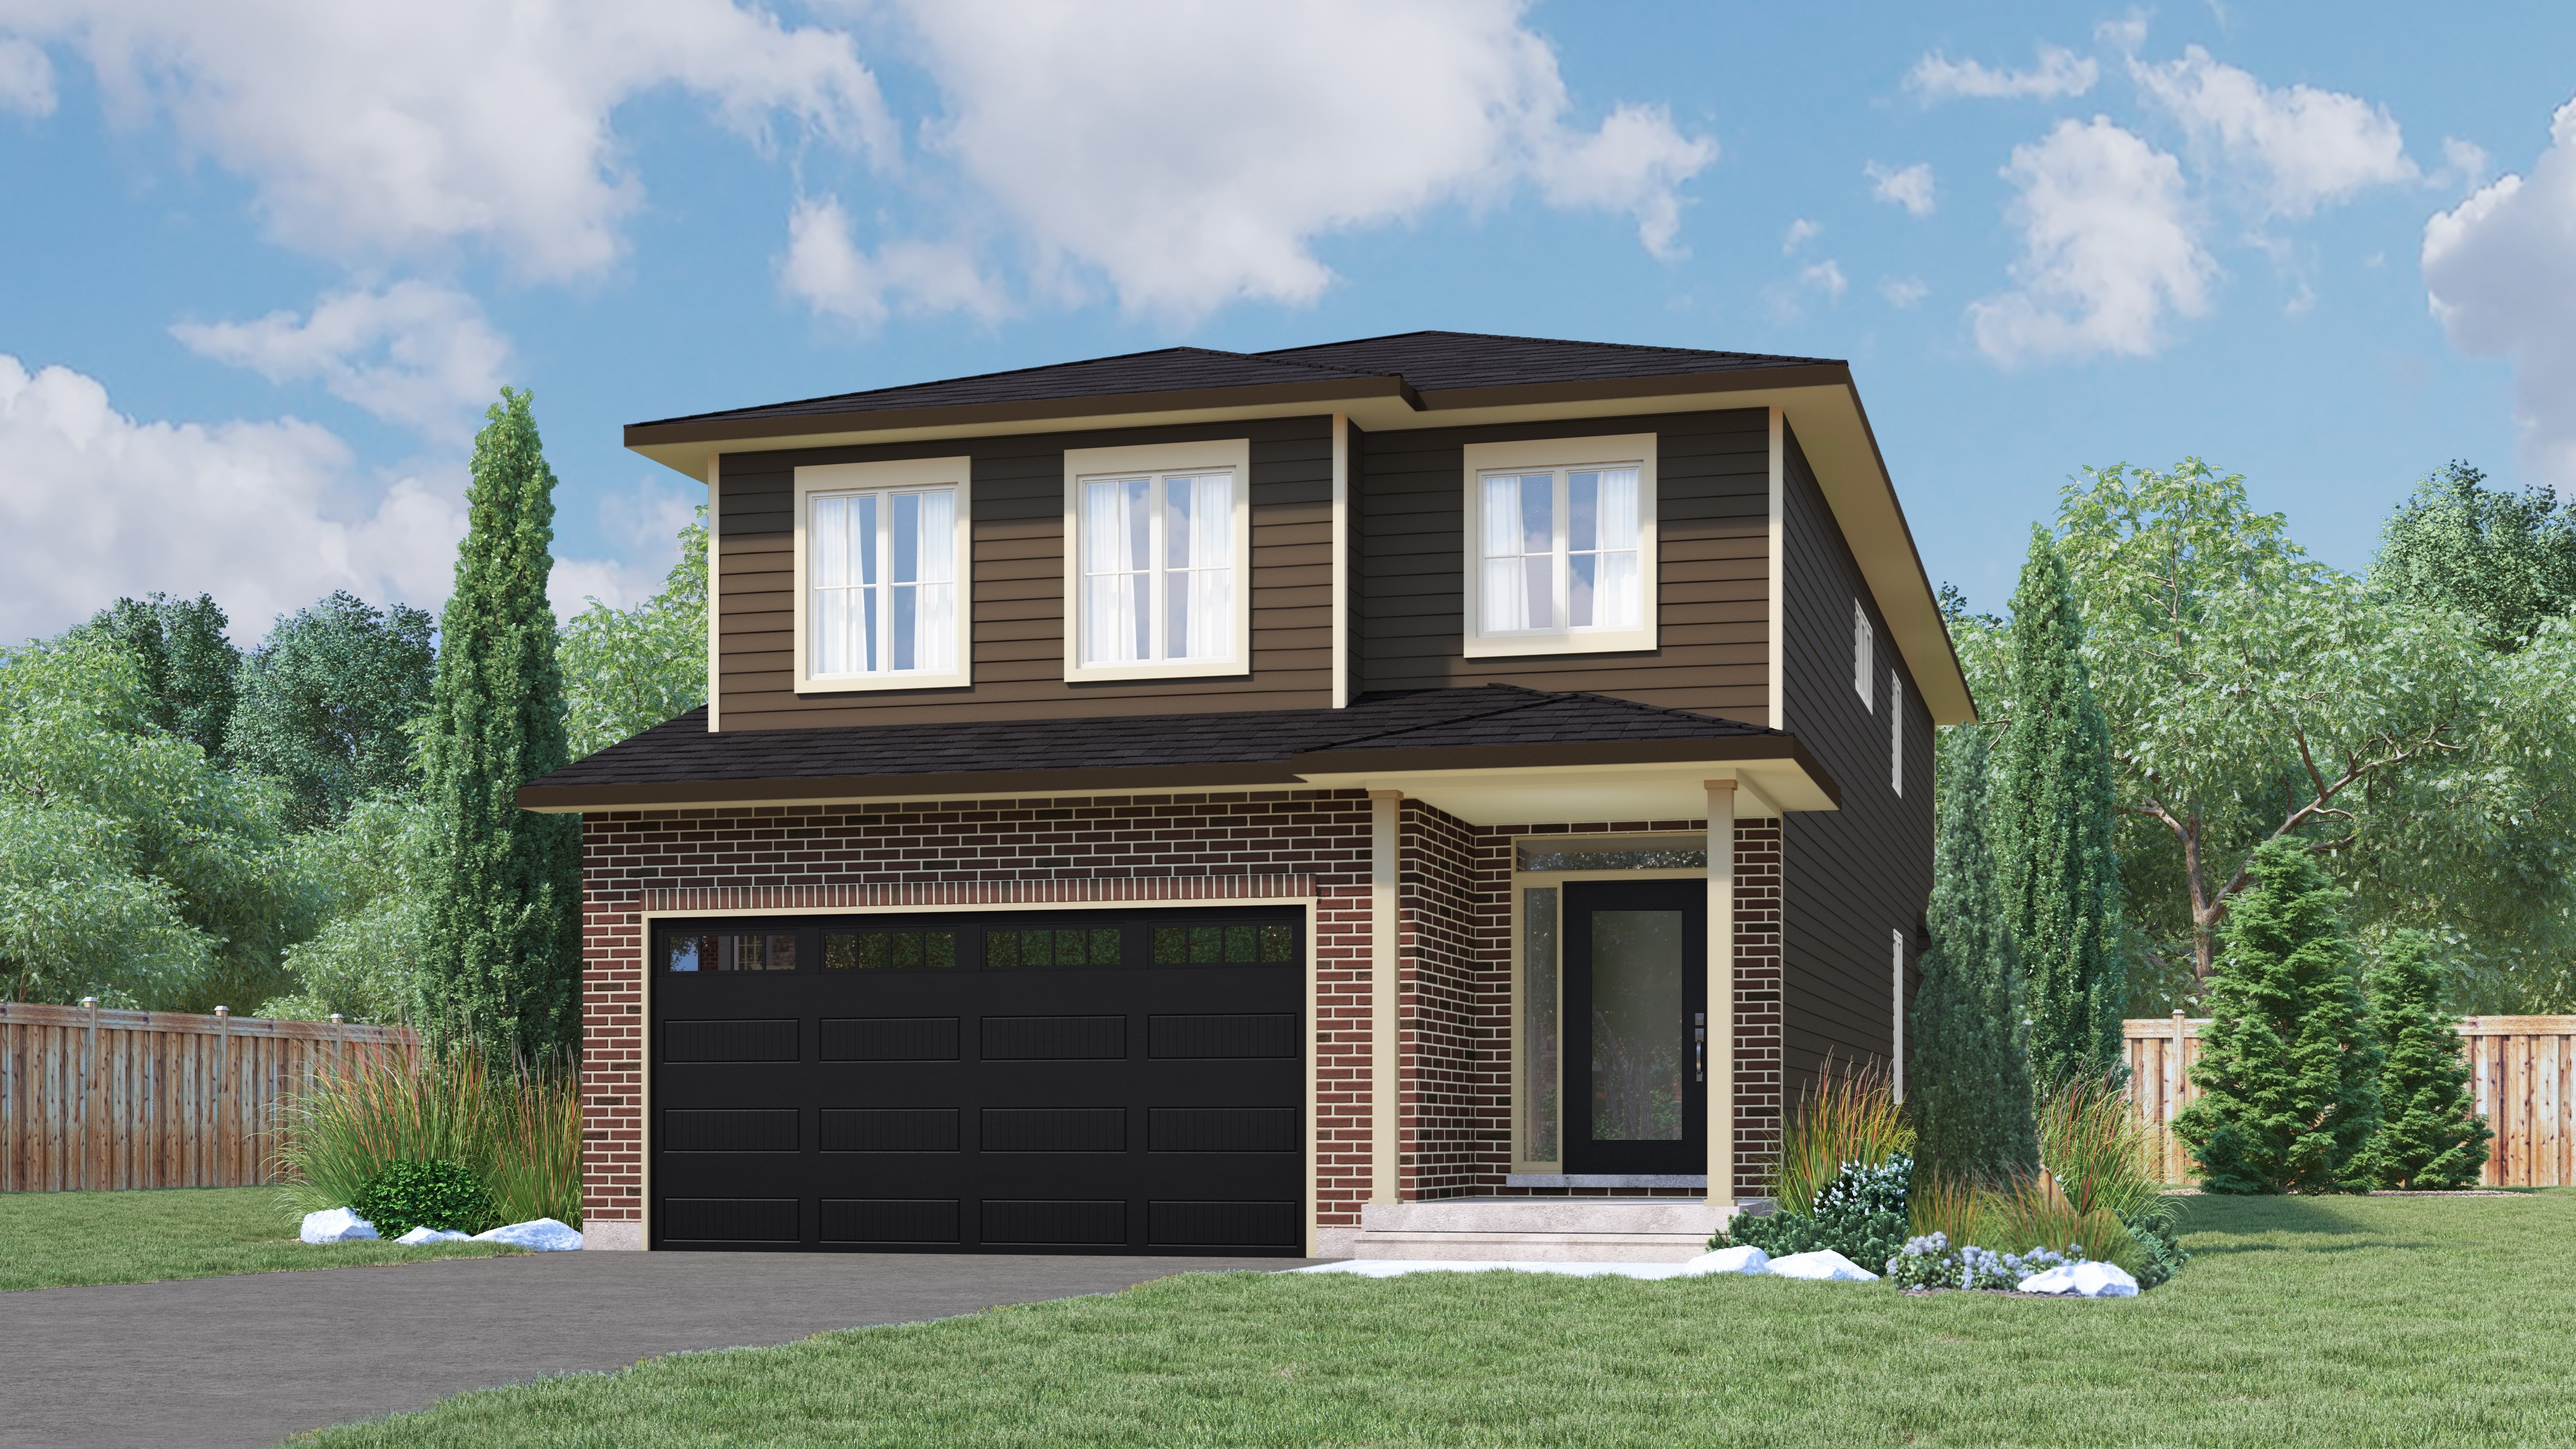 Image showing home elevation option a